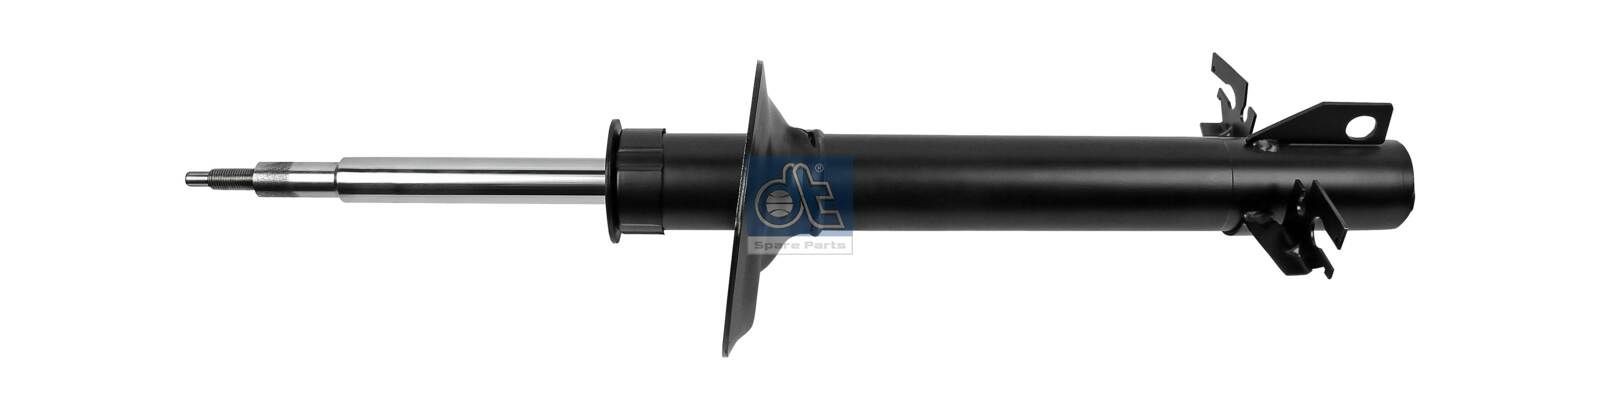 DT Spare Parts 12.60001 Shock absorber Front Axle, Gas Pressure, Suspension Strut, Bottom Yoke, Top pin